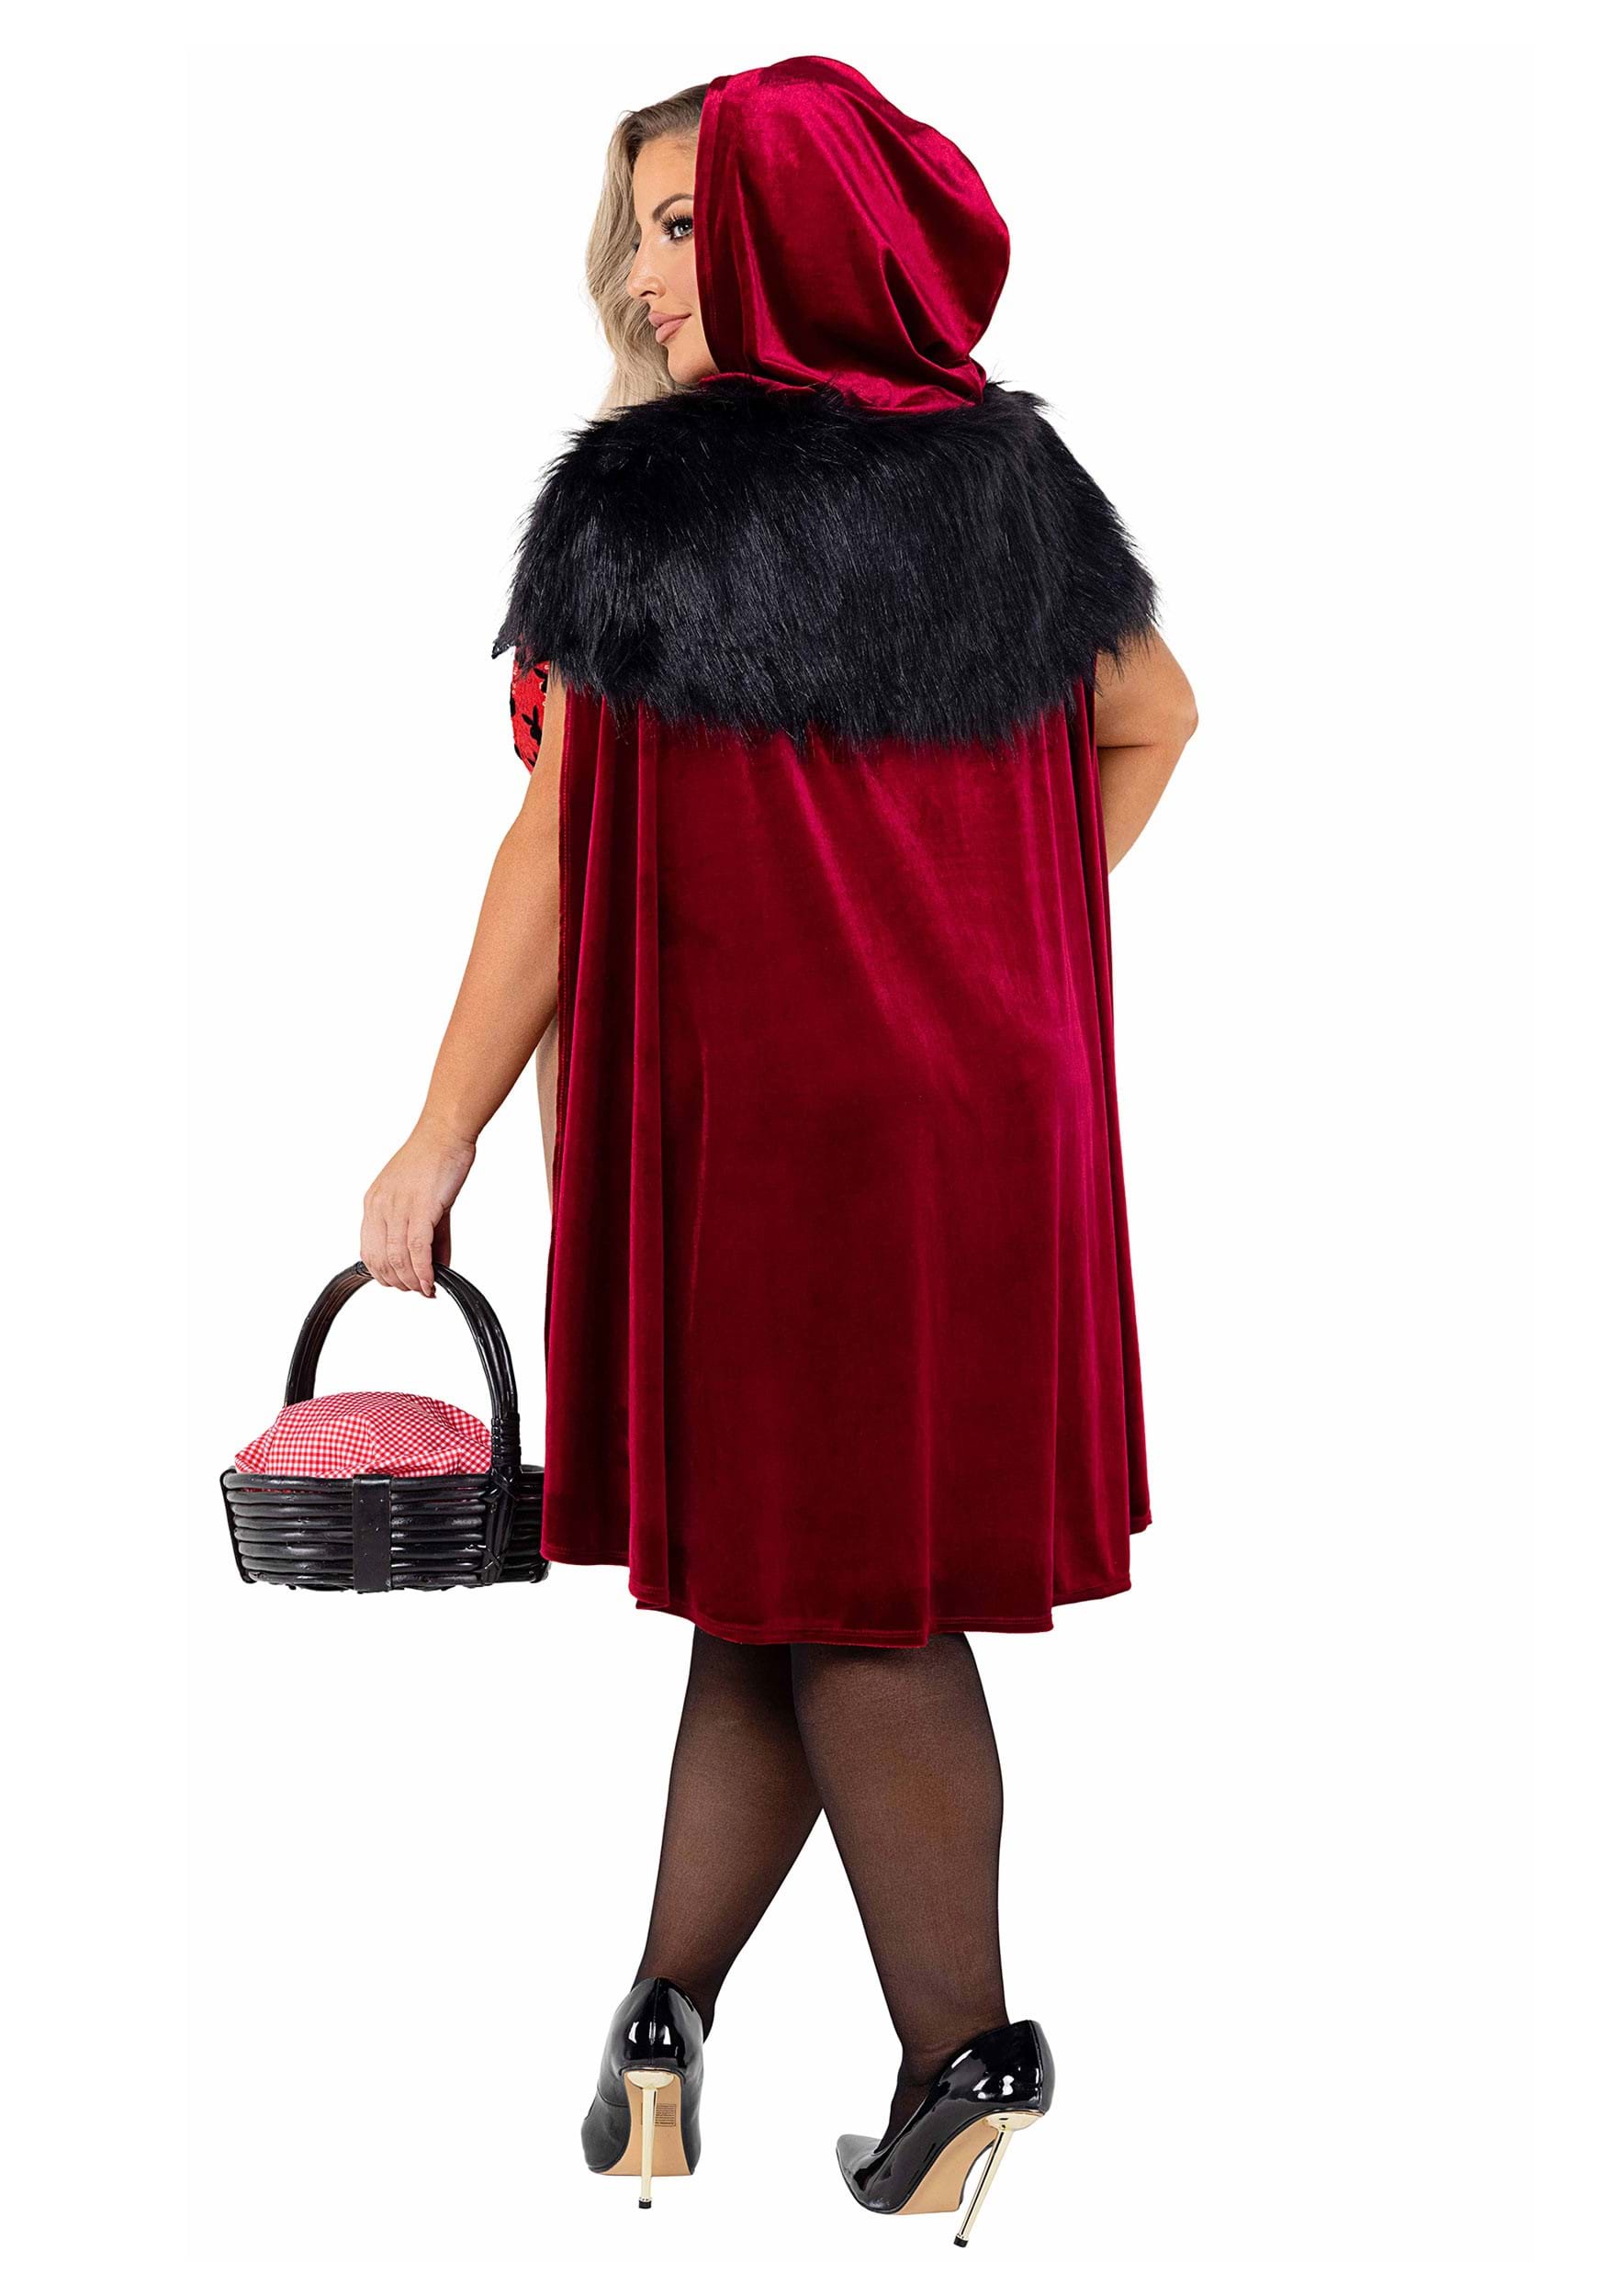 Plus Size Playboy Red Riding Hood Women's Costume